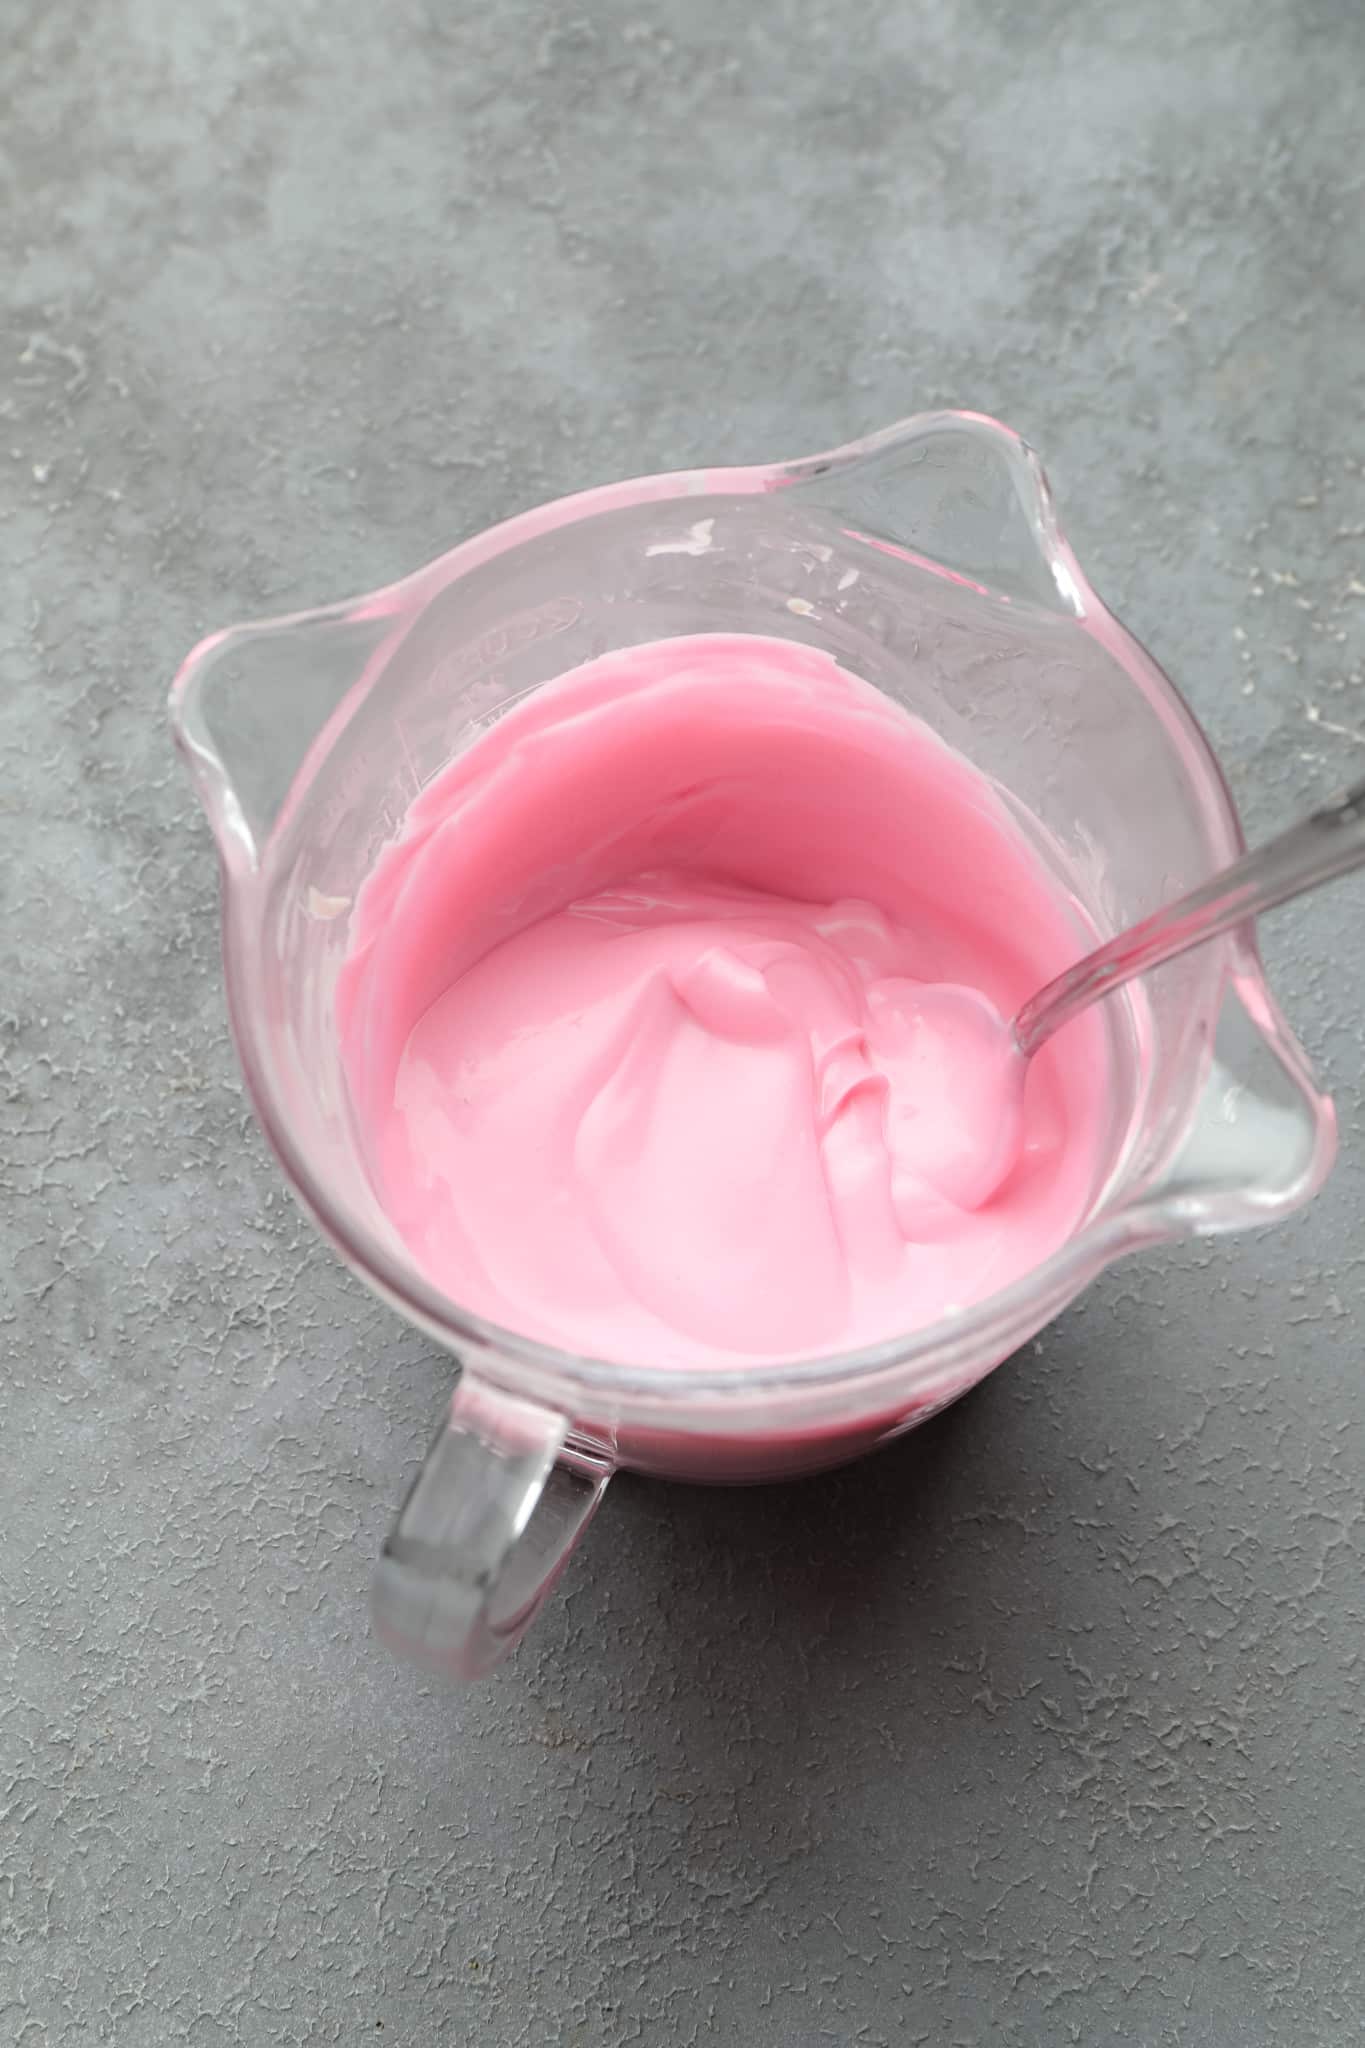 melted pink chocolate in a glass measuring cup.